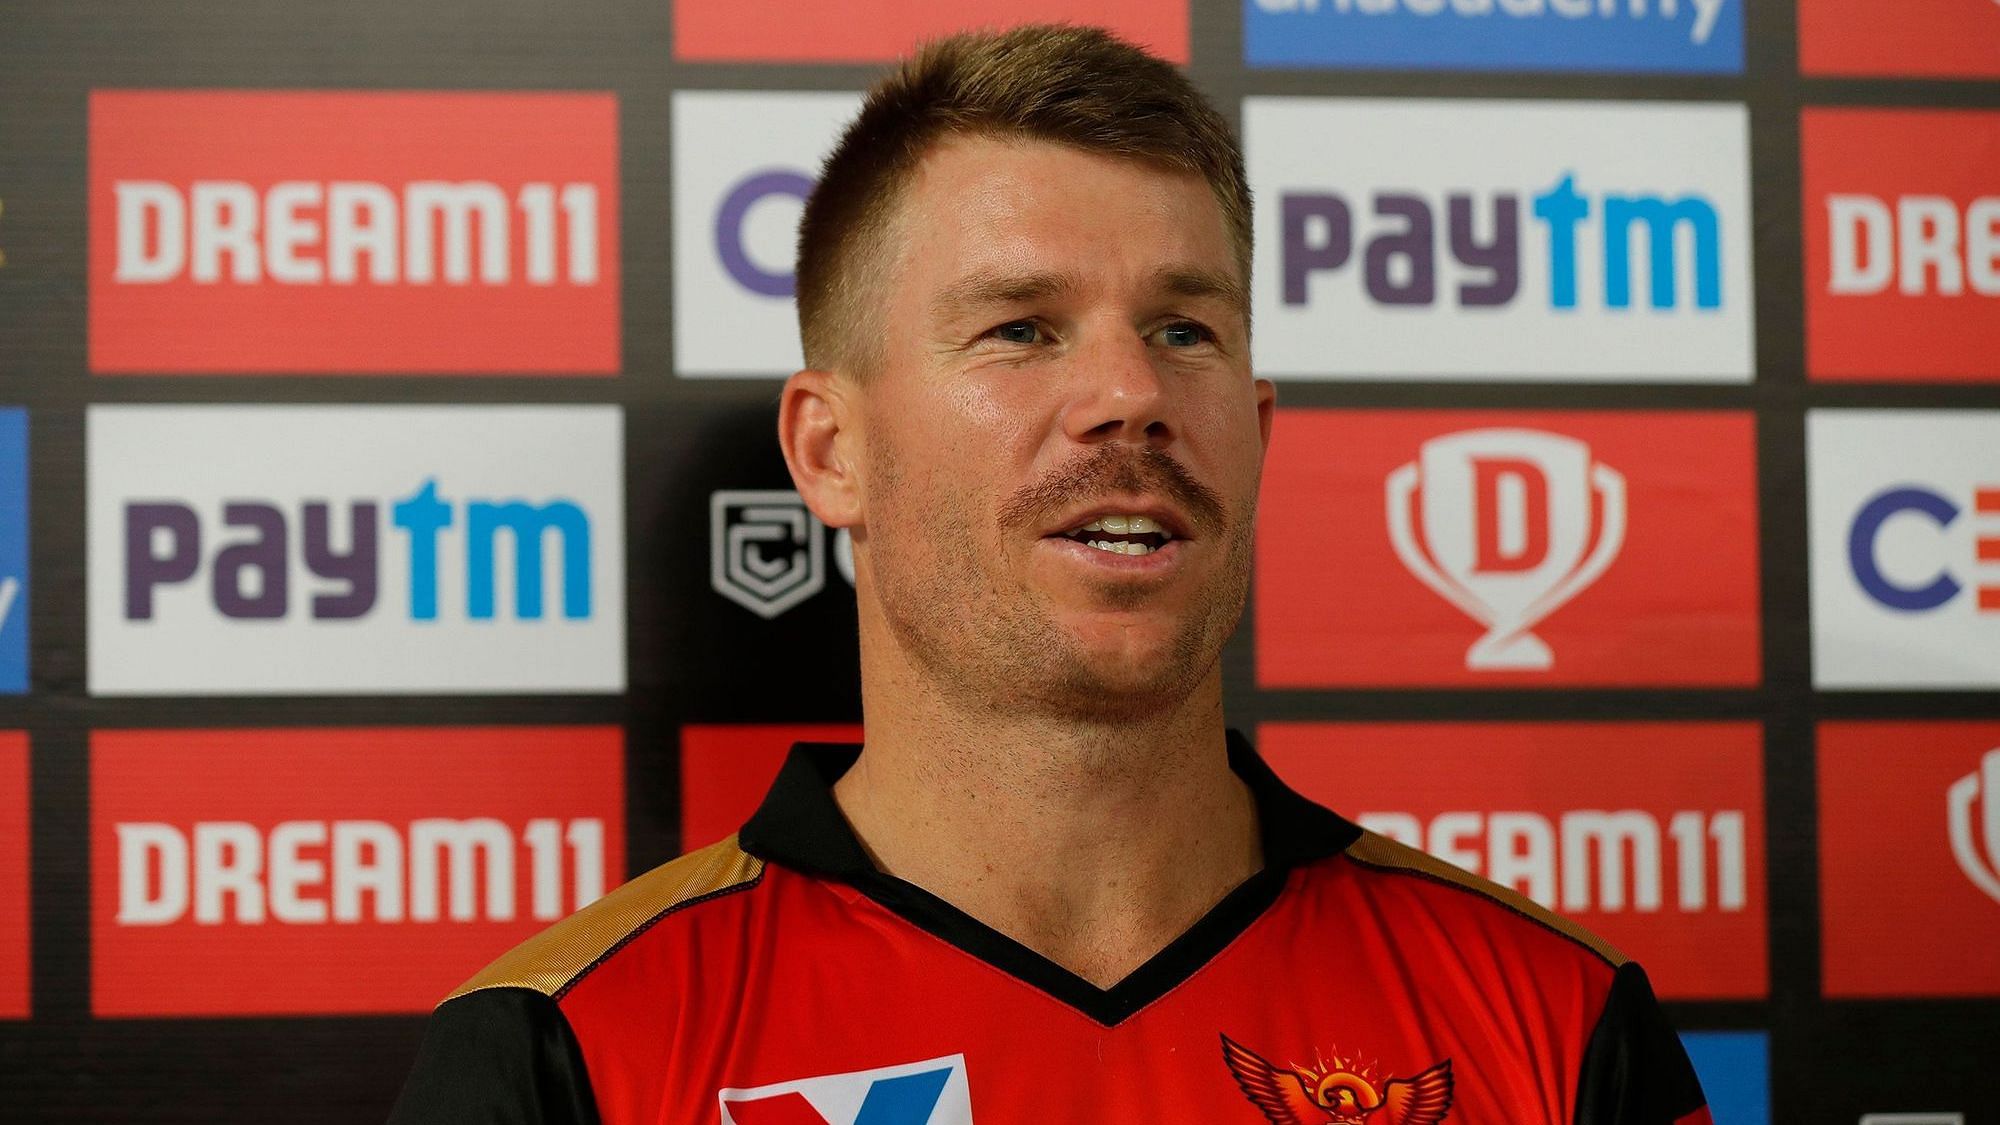 David Warner was happy and proud to see the team winning on the back of performances from youngsters in the team